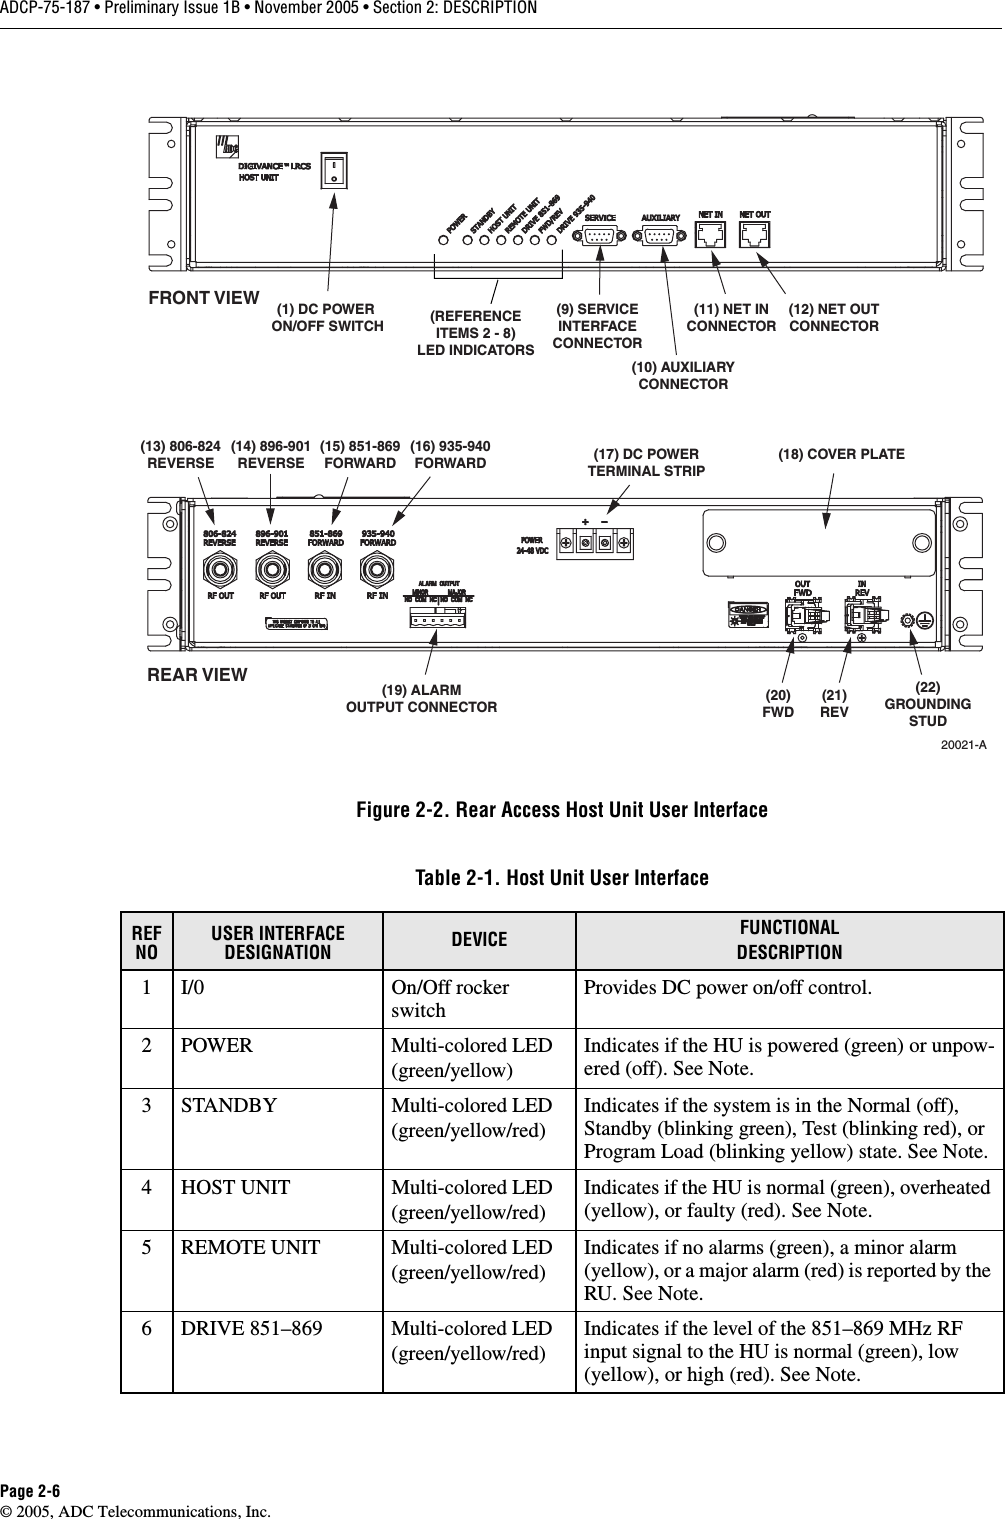 ADCP-75-187 • Preliminary Issue 1B • November 2005 • Section 2: DESCRIPTIONPage 2-6© 2005, ADC Telecommunications, Inc.Figure 2-2. Rear Access Host Unit User InterfaceTable 2-1. Host Unit User InterfaceREF NOUSER INTERFACE DESIGNATION DEVICE FUNCTIONALDESCRIPTION1 I/0 On/Off rocker switchProvides DC power on/off control. 2 POWER Multi-colored LED(green/yellow)Indicates if the HU is powered (green) or unpow-ered (off). See Note.3 STANDBY Multi-colored LED(green/yellow/red)Indicates if the system is in the Normal (off), Standby (blinking green), Test (blinking red), or Program Load (blinking yellow) state. See Note. 4 HOST UNIT Multi-colored LED(green/yellow/red)Indicates if the HU is normal (green), overheated (yellow), or faulty (red). See Note. 5 REMOTE UNIT Multi-colored LED(green/yellow/red)Indicates if no alarms (green), a minor alarm (yellow), or a major alarm (red) is reported by the RU. See Note.6 DRIVE 851–869 Multi-colored LED(green/yellow/red)Indicates if the level of the 851–869 MHz RF input signal to the HU is normal (green), low (yellow), or high (red). See Note. (1) DC POWER ON/OFF SWITCH(21)REV(20)FWD(REFERENCEITEMS 2 - 8)LED INDICATORS(9) SERVICEINTERFACECONNECTOR(11) NET INCONNECTOR(10) AUXILIARYCONNECTOR(12) NET OUTCONNECTOR(19) ALARMOUTPUT CONNECTOR(13) 806-824REVERSE(15) 851-869FORWARD(16) 935-940FORWARD(14) 896-901REVERSE20021-A(17) DC POWERTERMINAL STRIPREAR VIEWFRONT VIEW(18) COVER PLATE(22)GROUNDINGSTUD